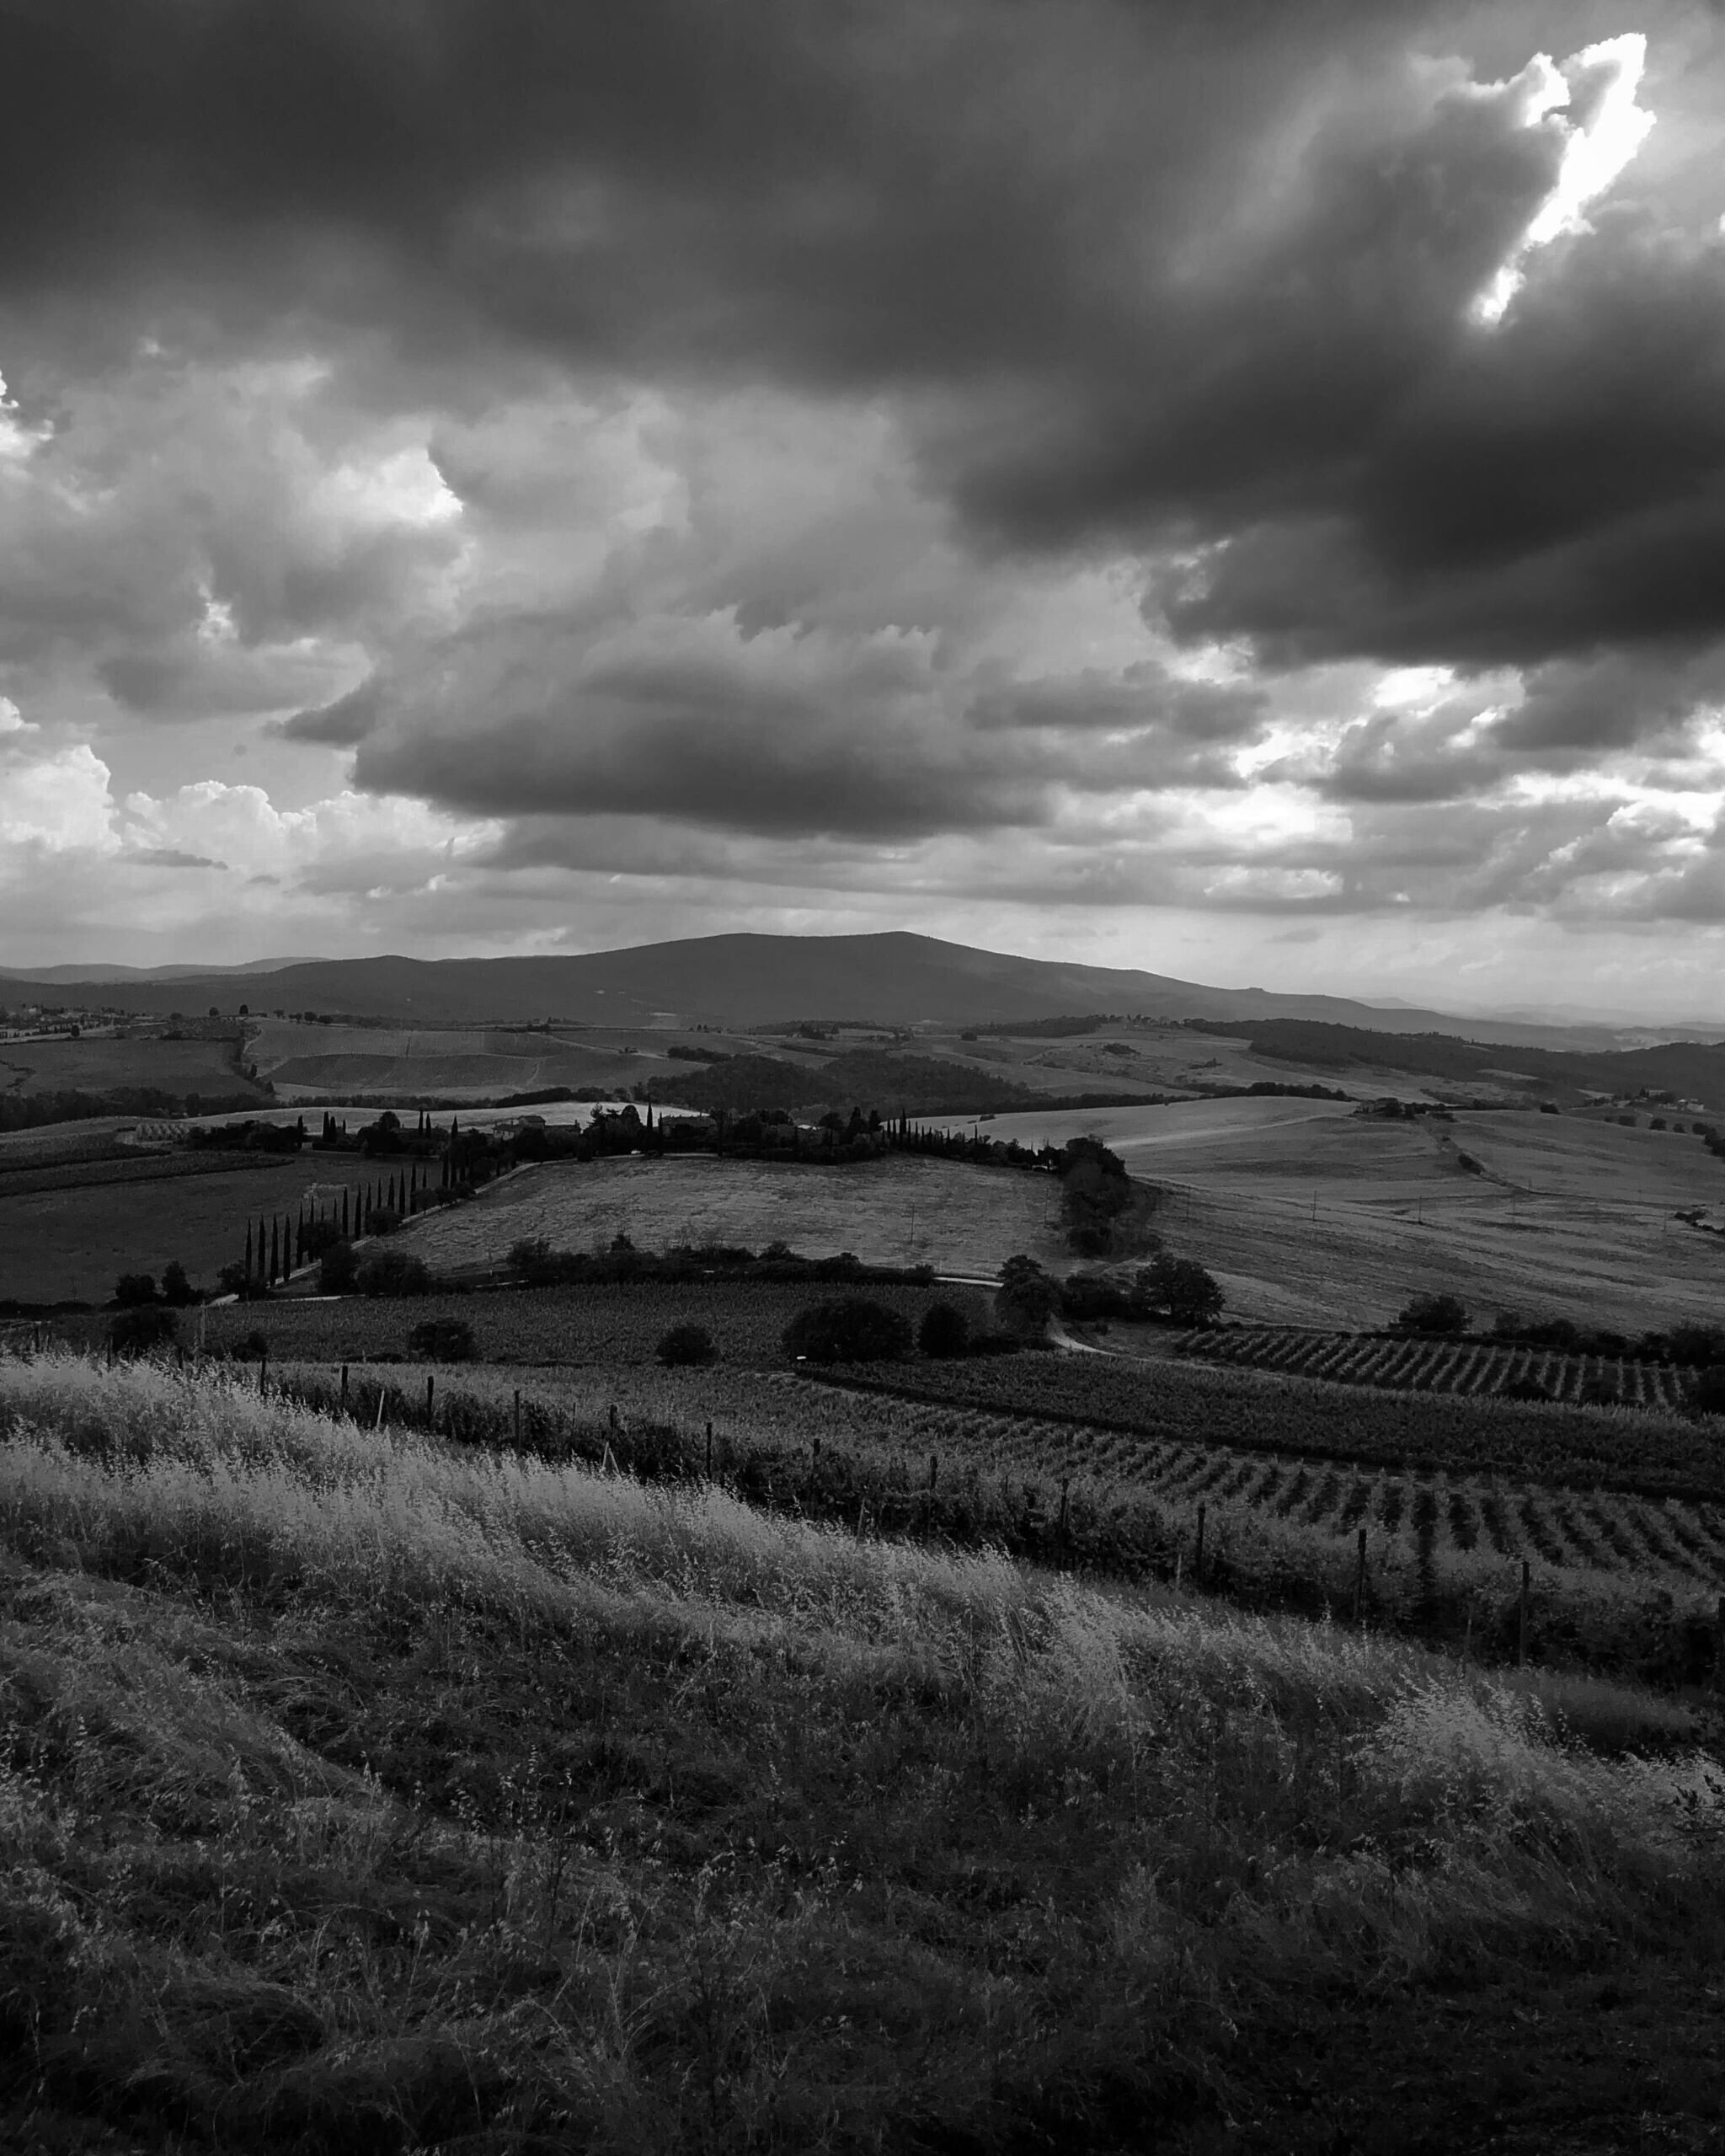 A black and white photograph of the Italian countryside with contrasting clouds.